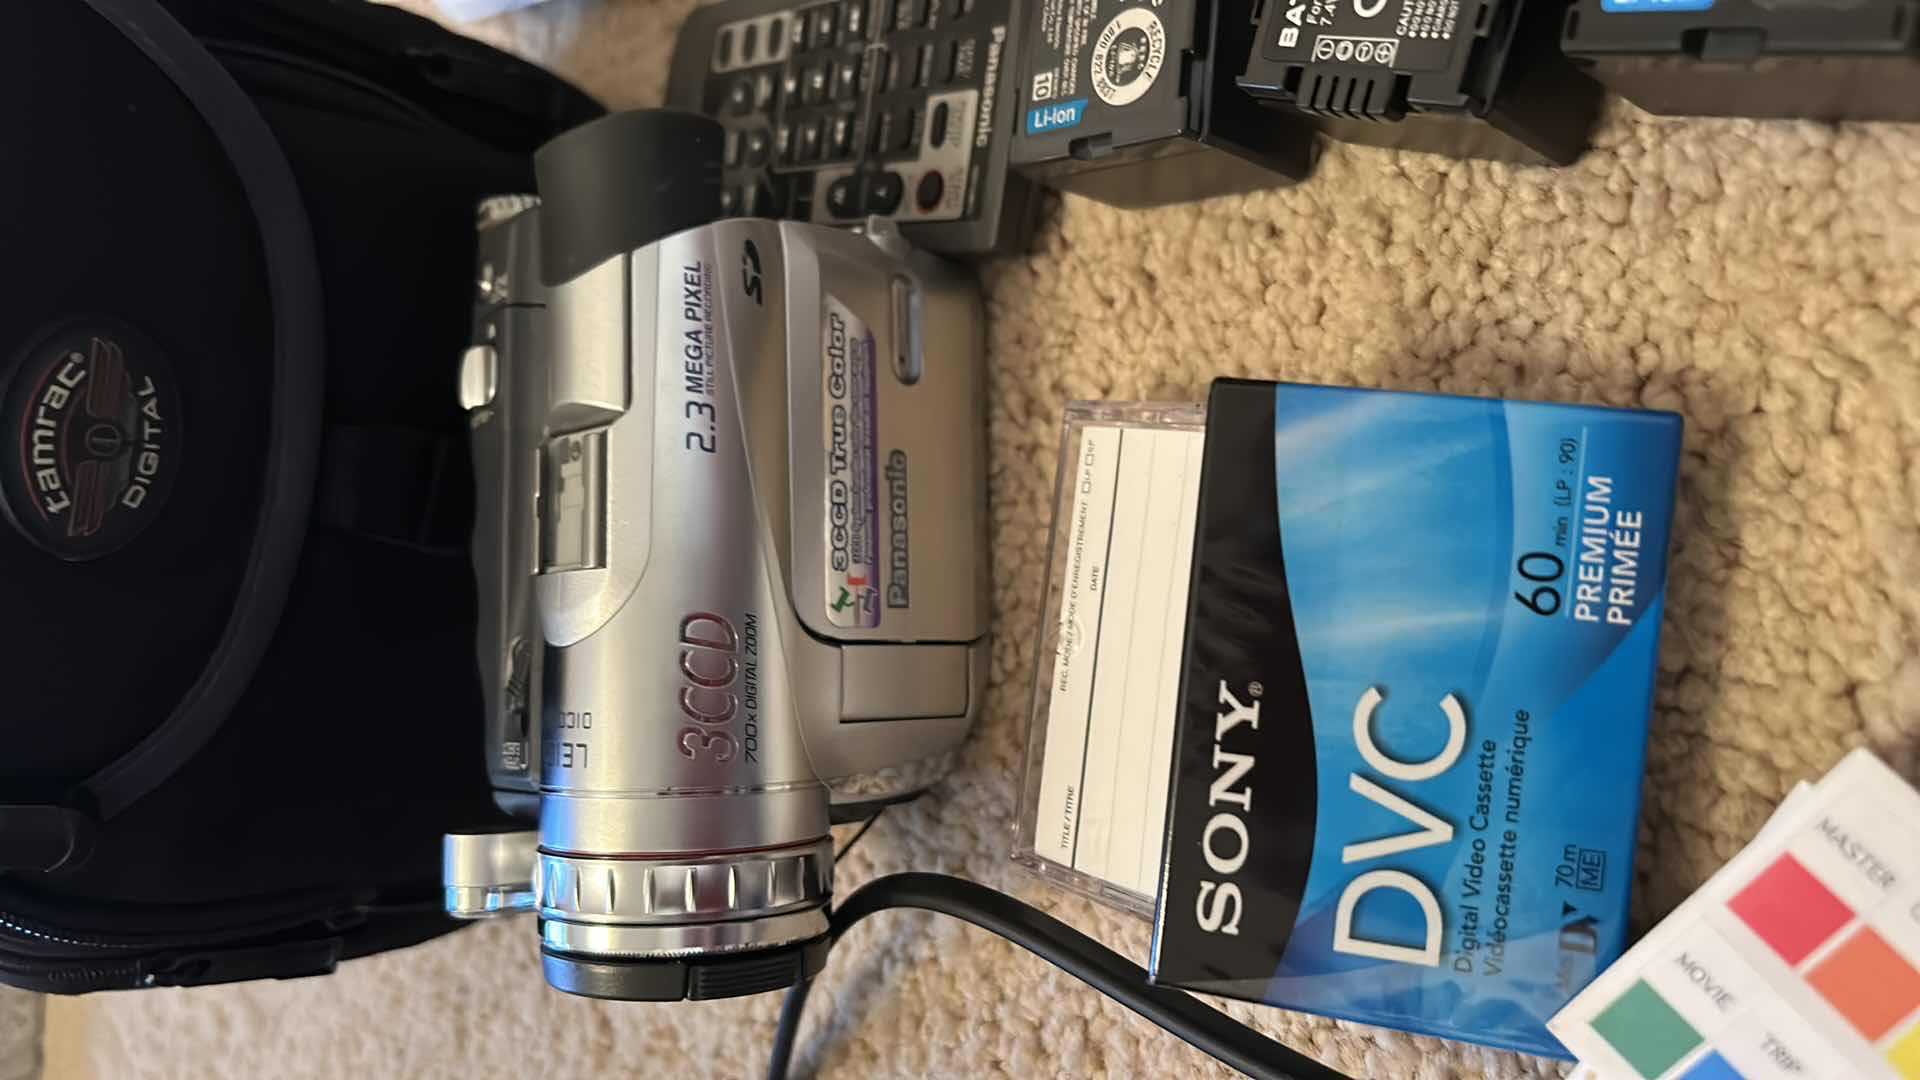 Photo 2 of Panasonic digital video camcorder with accessories and carrying case